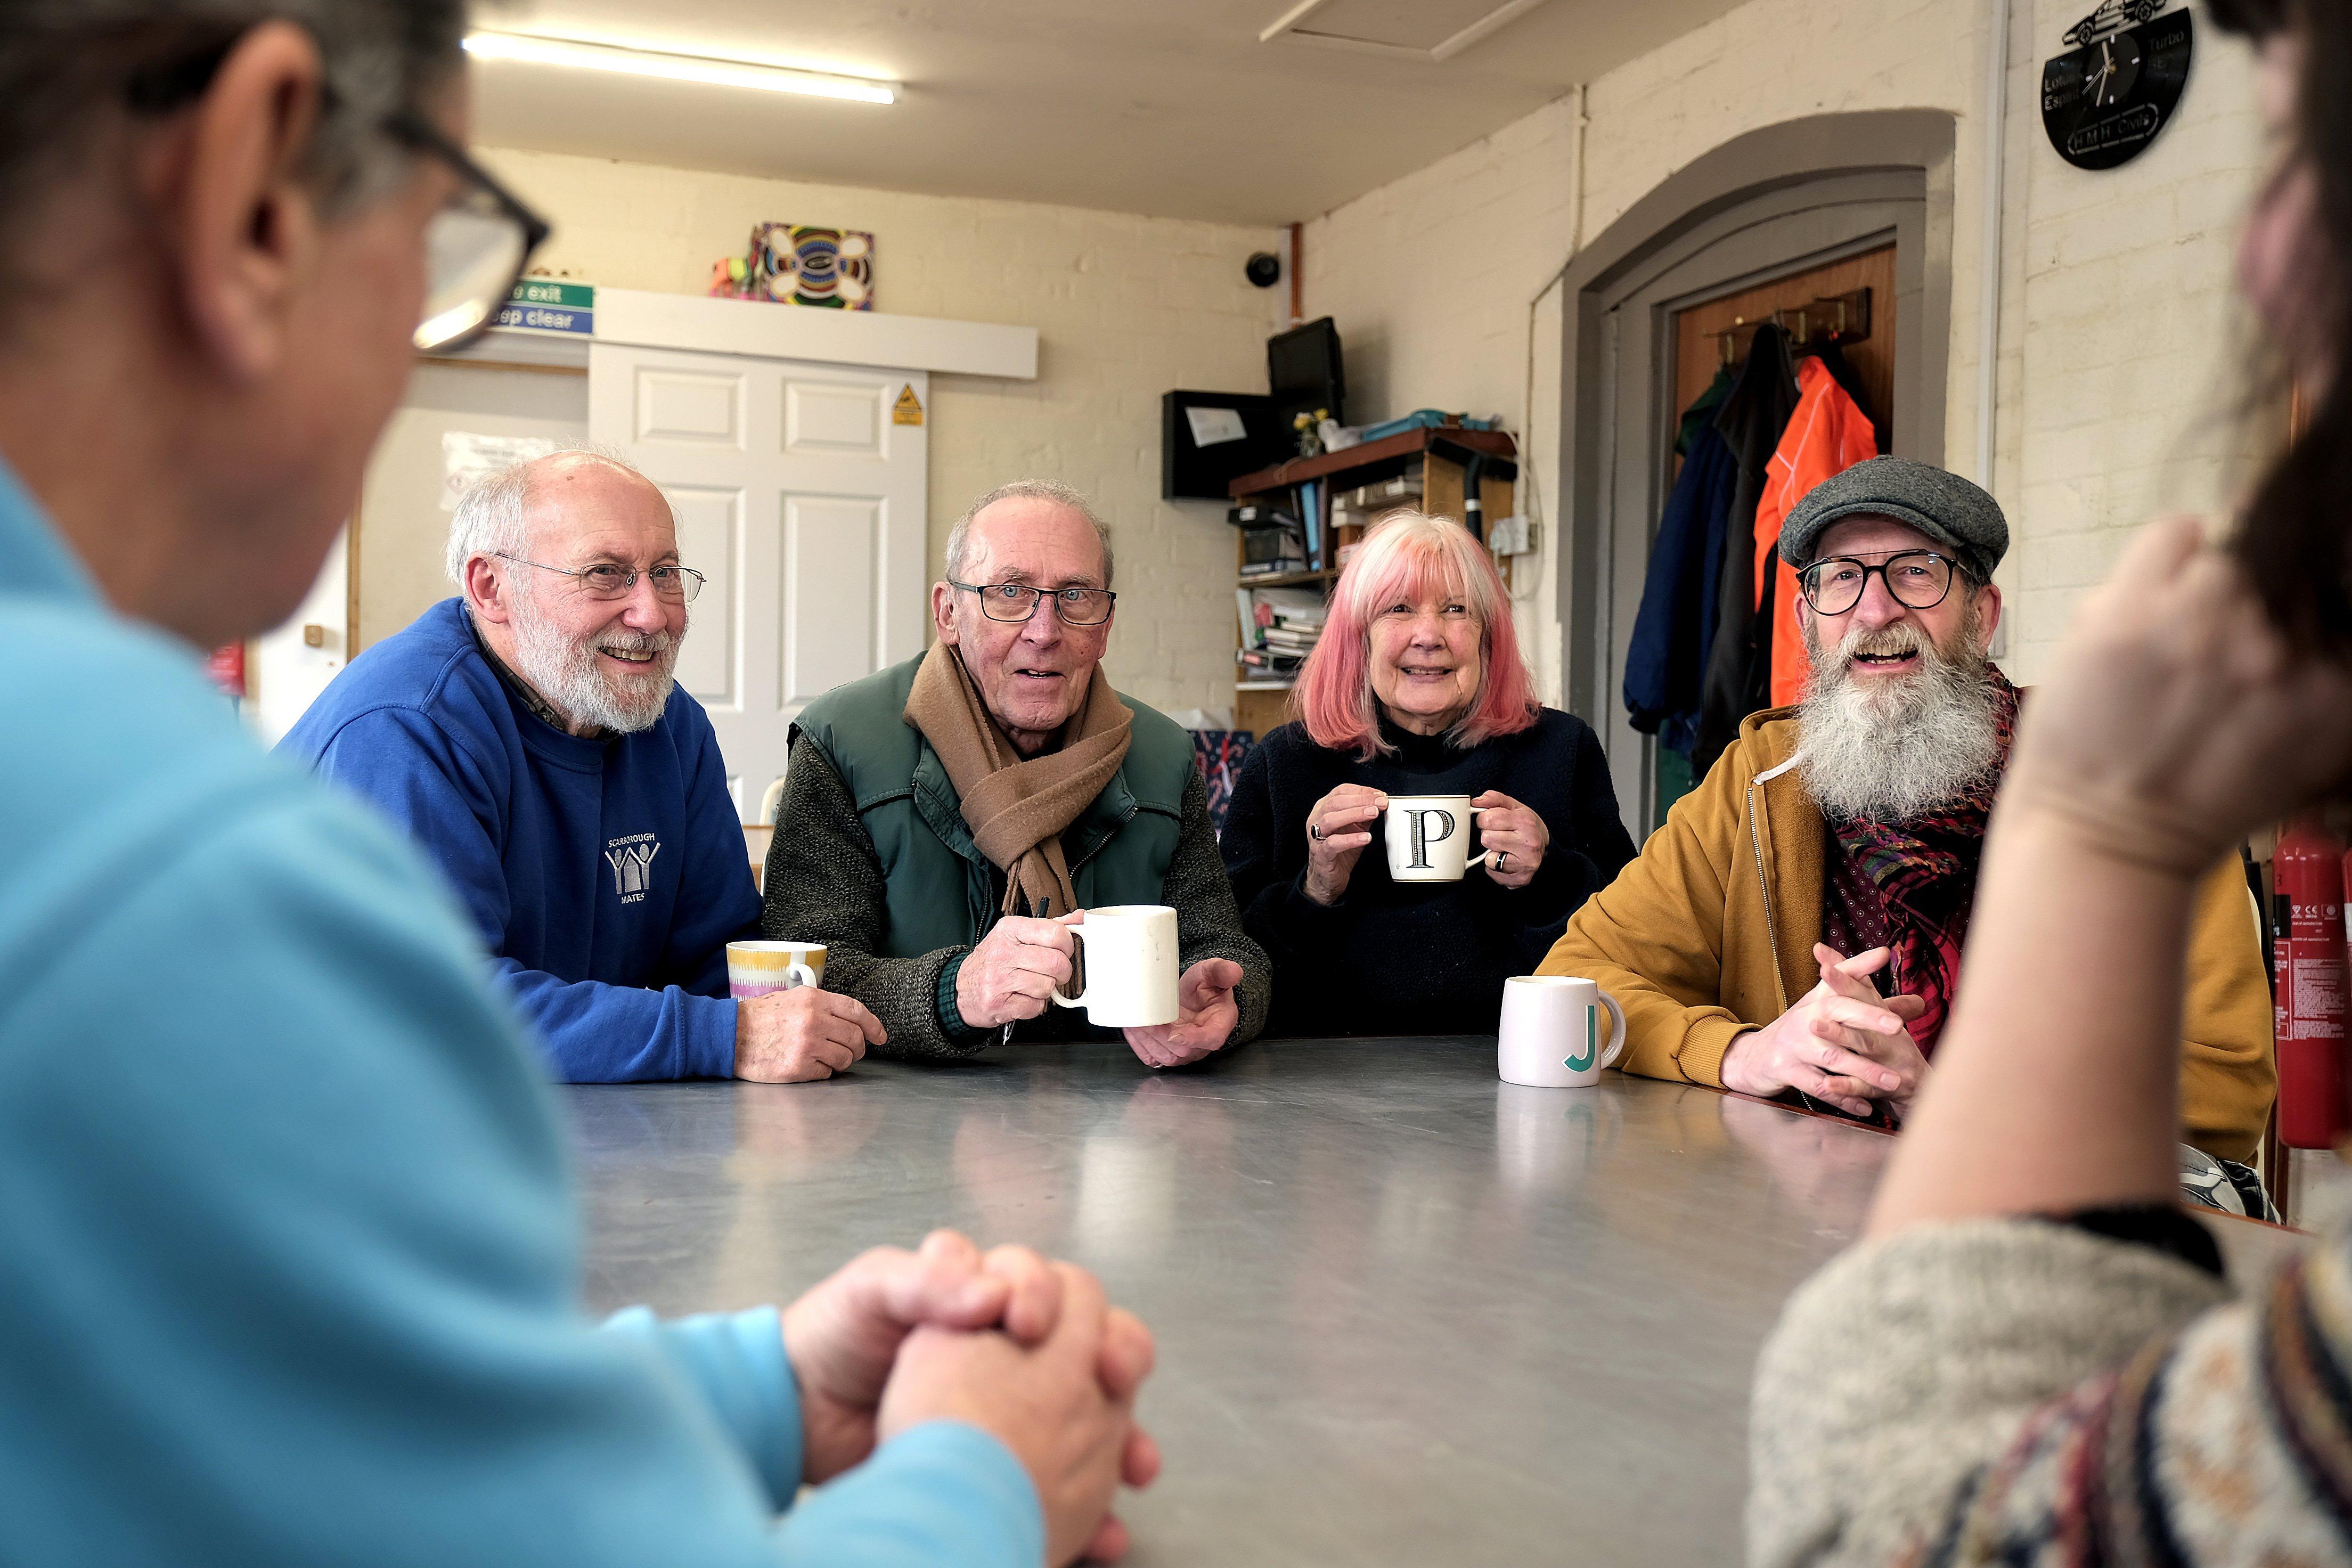 Scarborough Mates is a community charity where people meet up to try out new activities, exchange ideas and chat